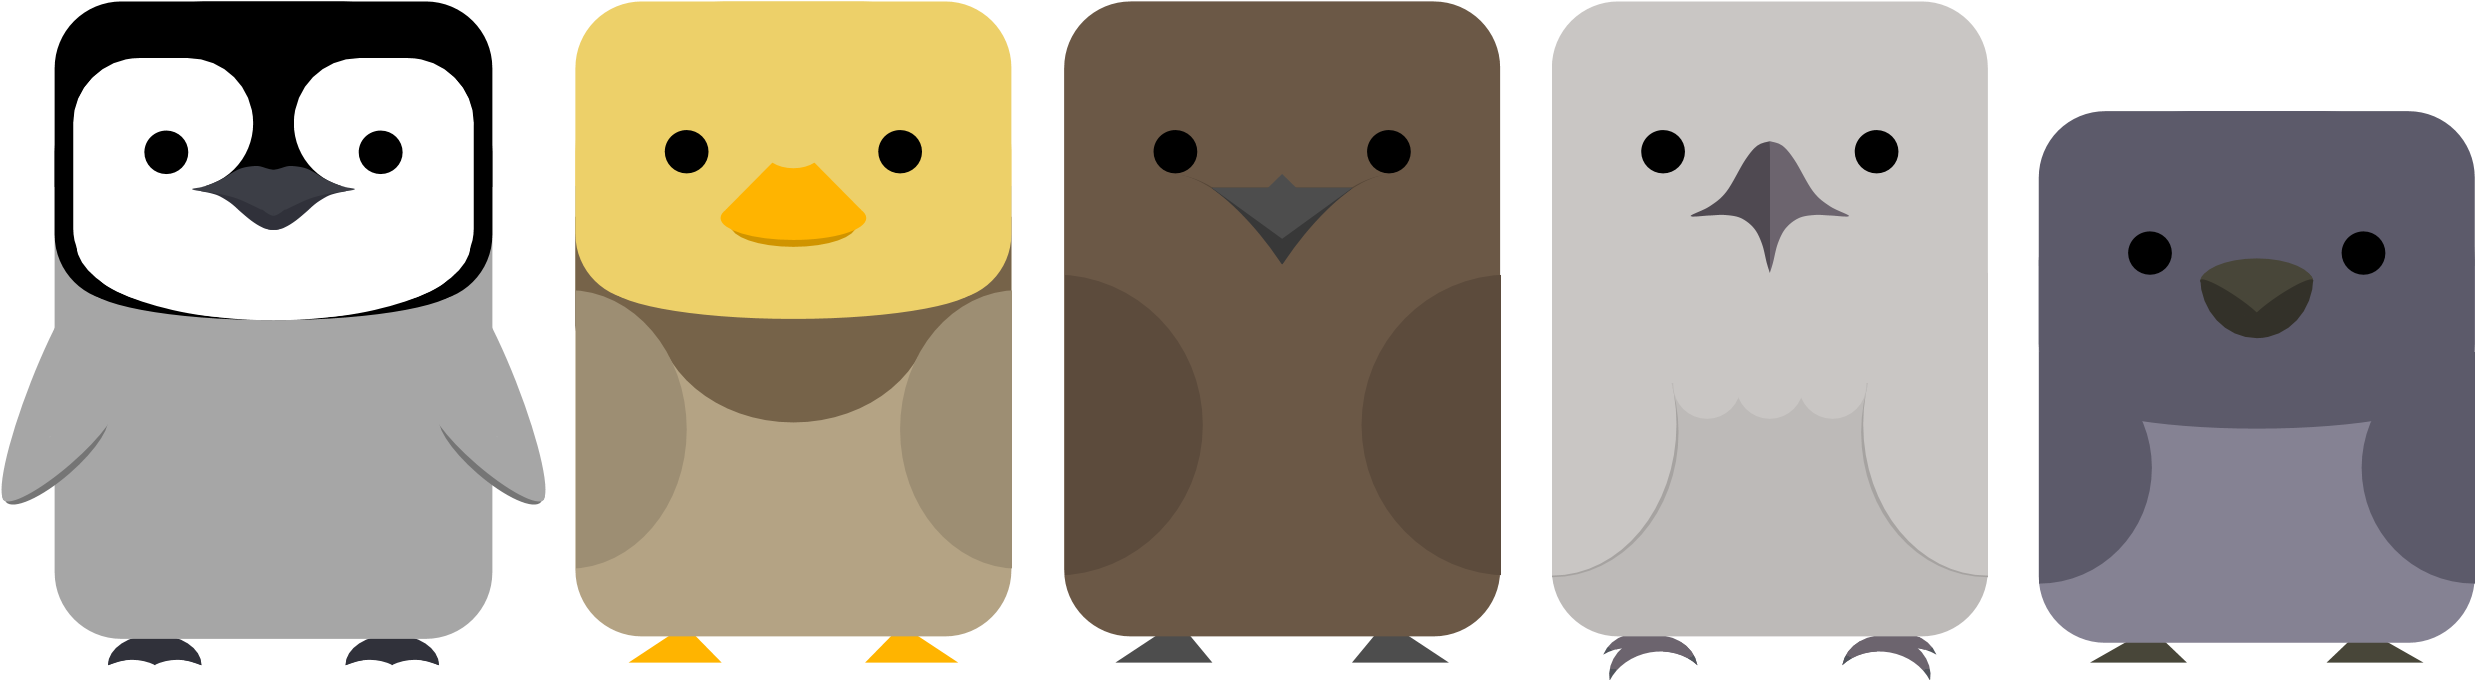 A Group Of Birds With Different Colors